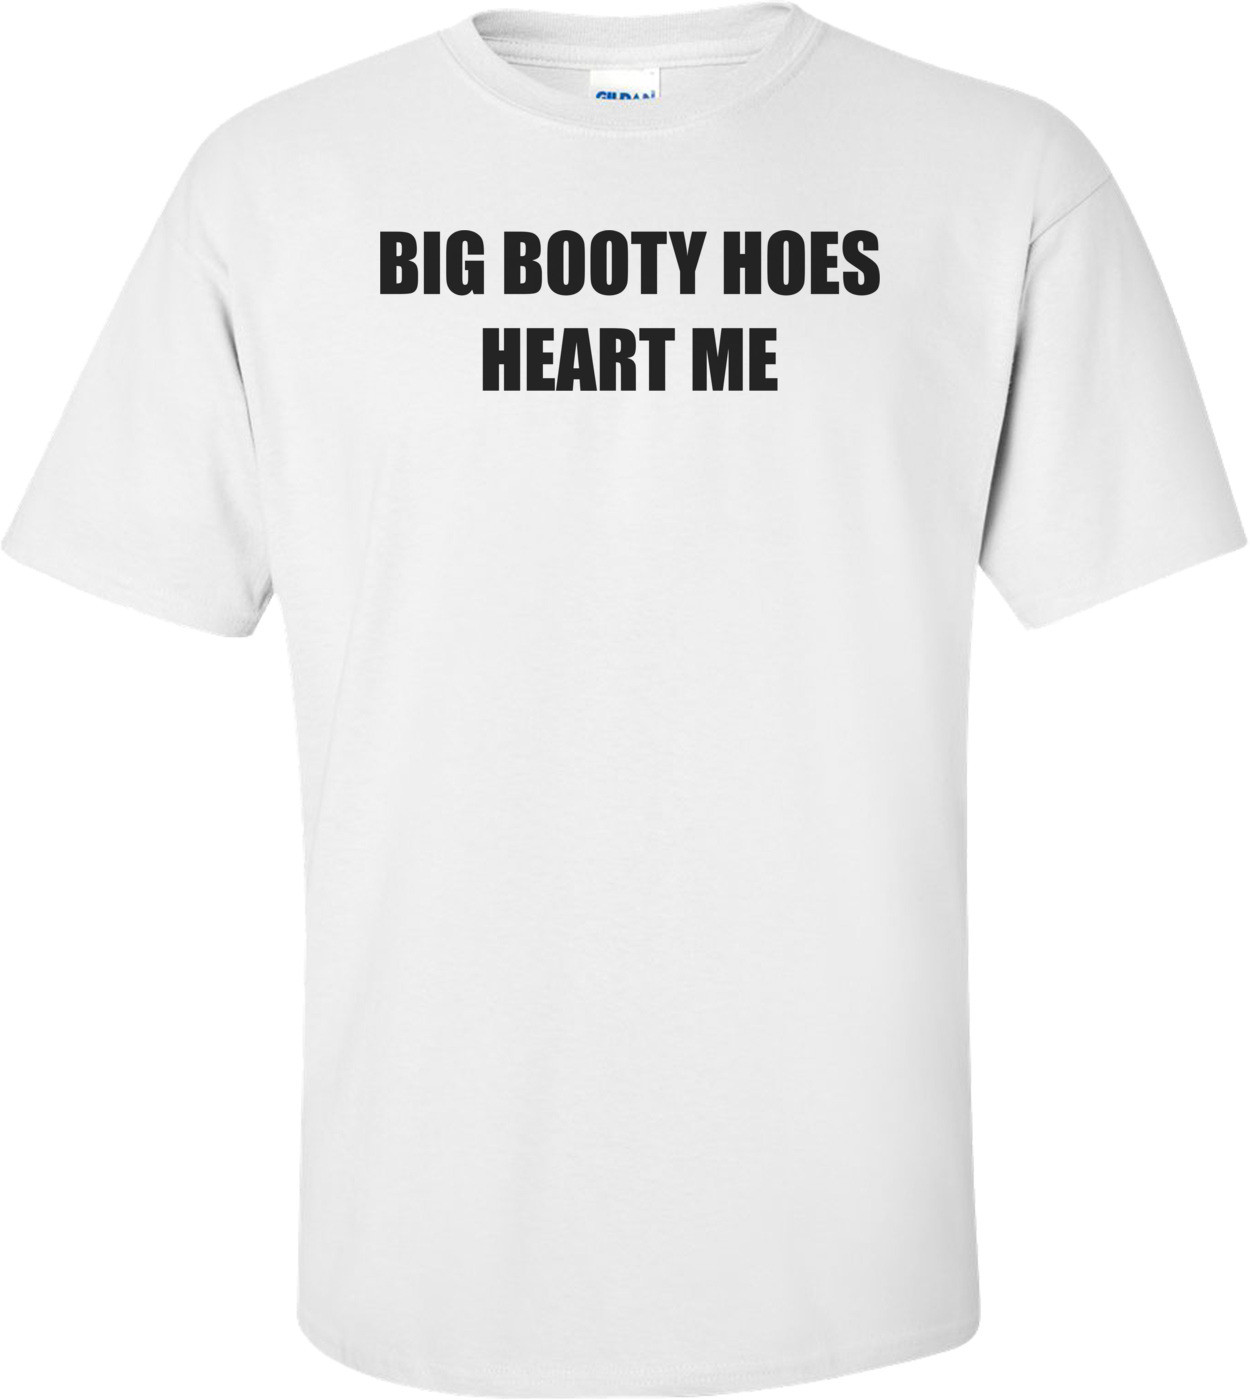 BIG BOOTY HOES HEART ME Shirt